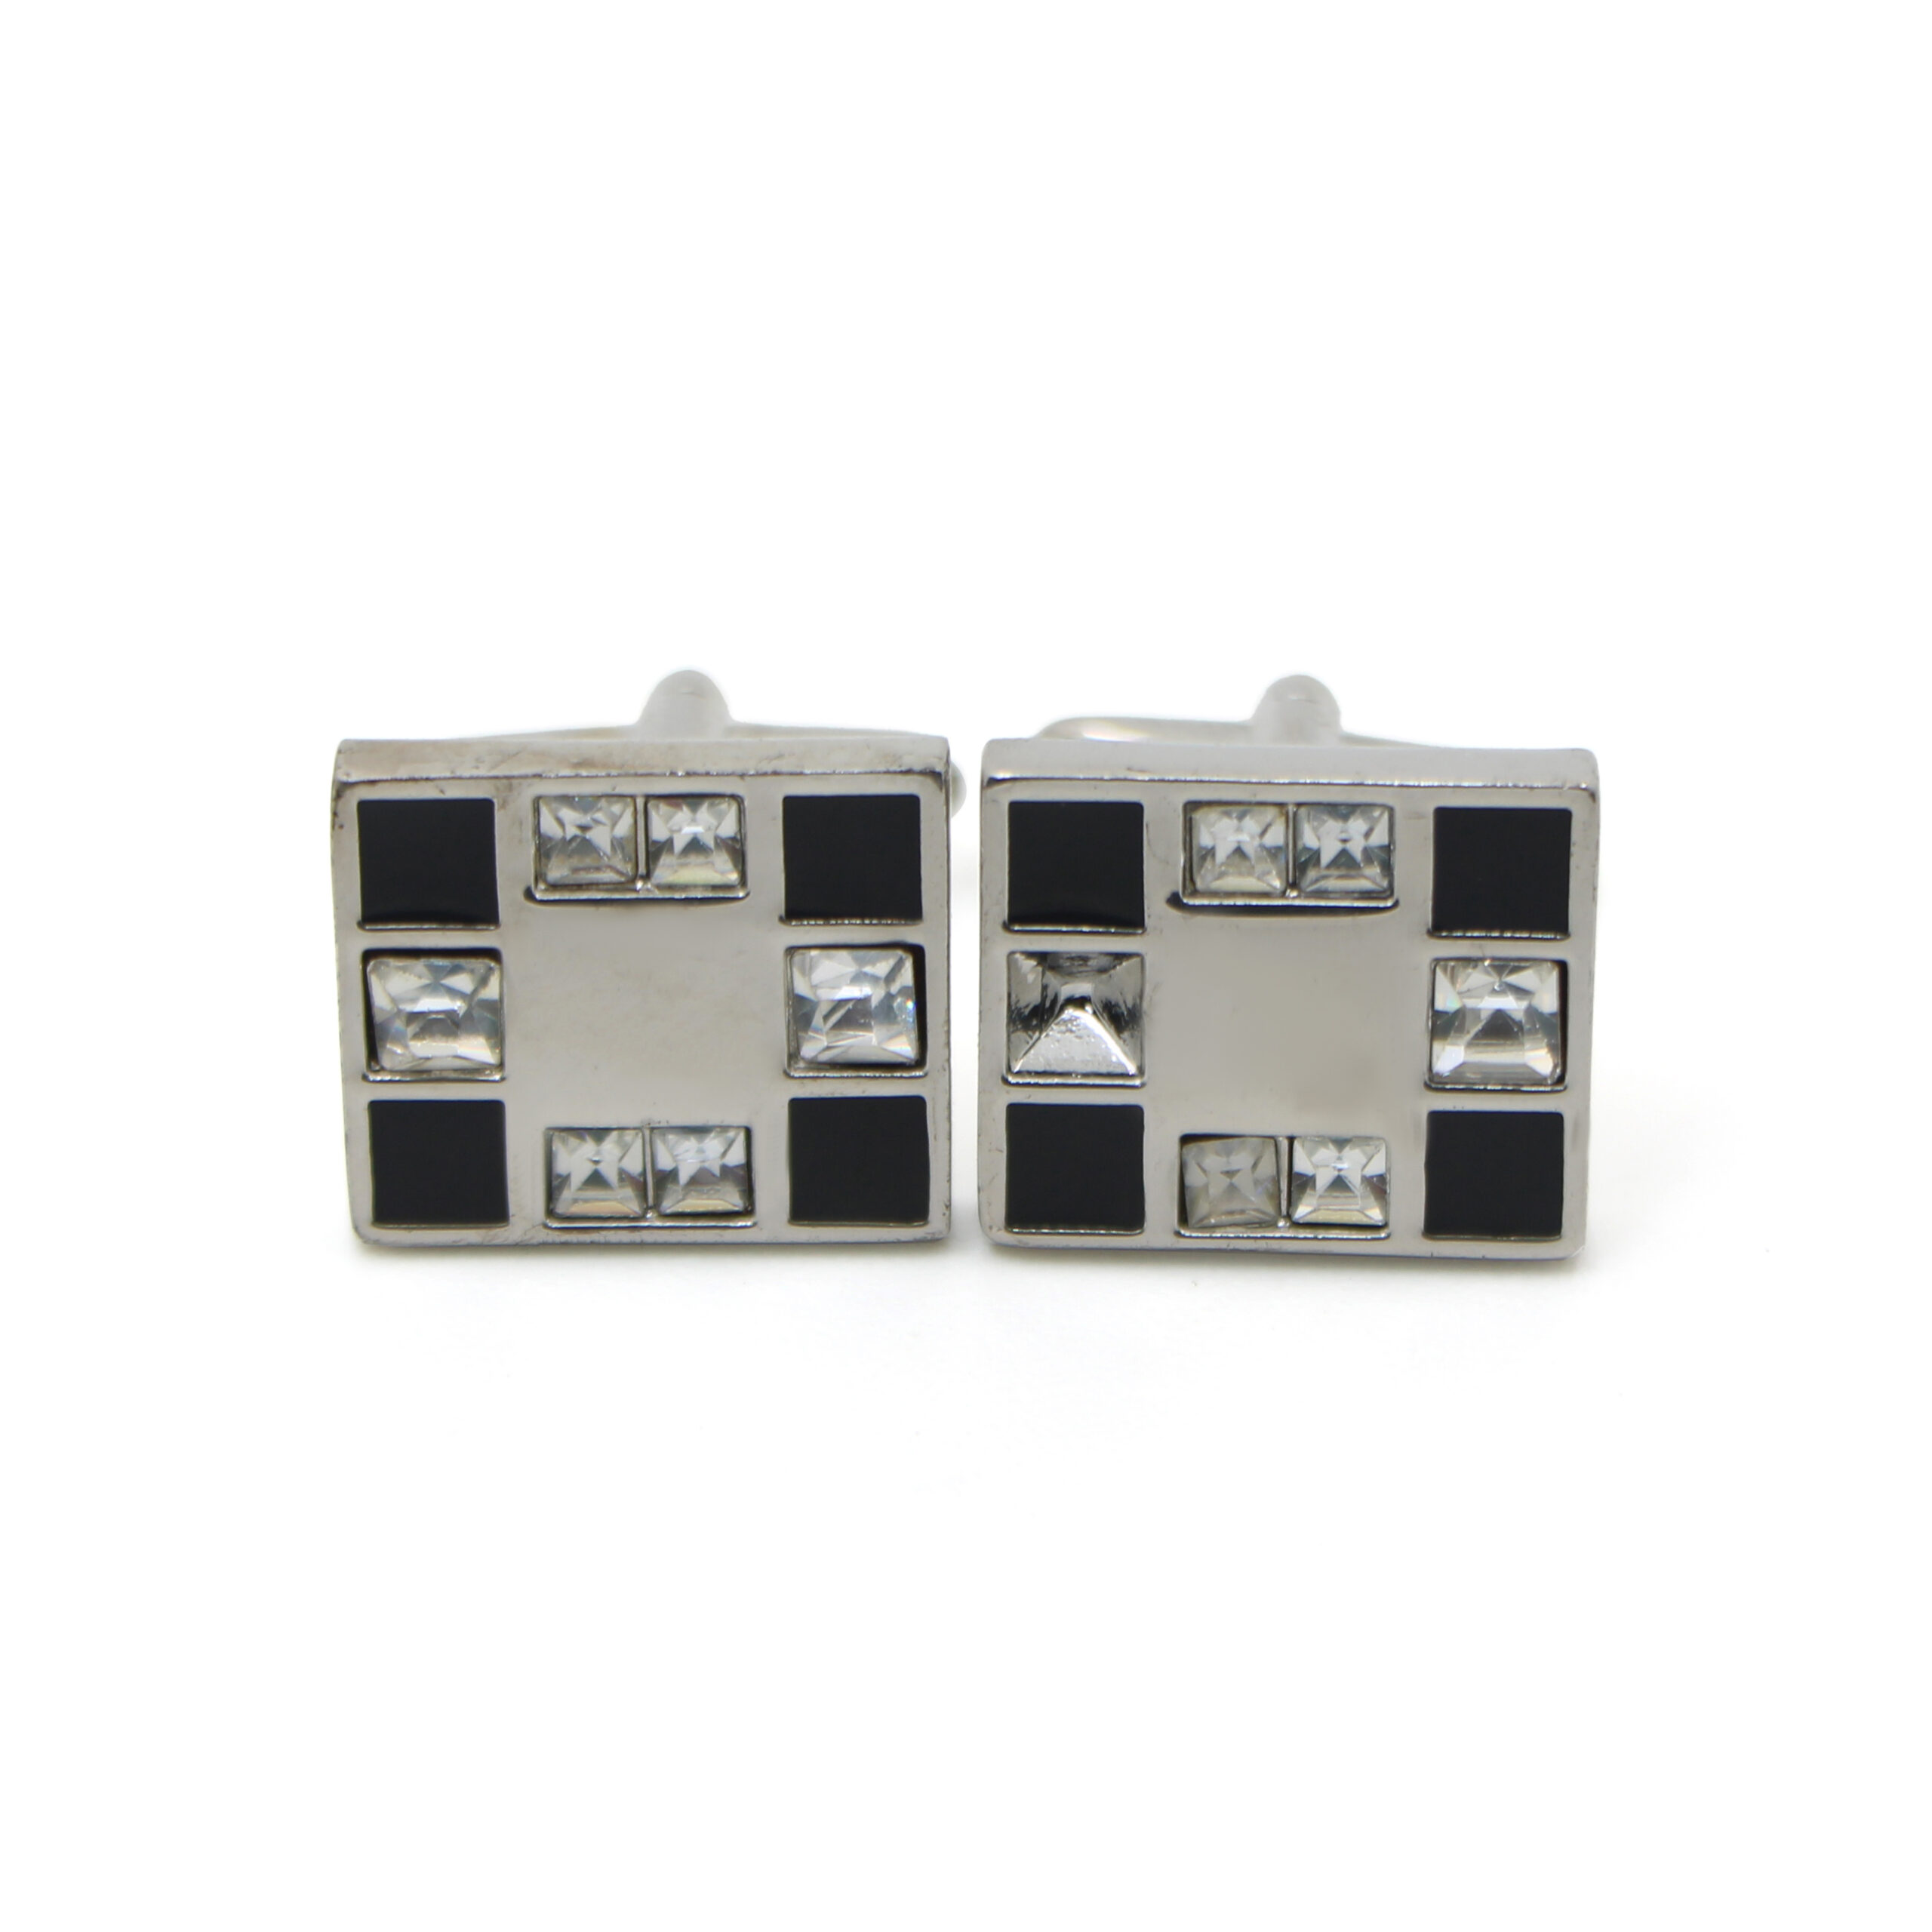 Cufflers Vintage Cufflinks for Men’s Shirt with a Gift Box – CU-1021